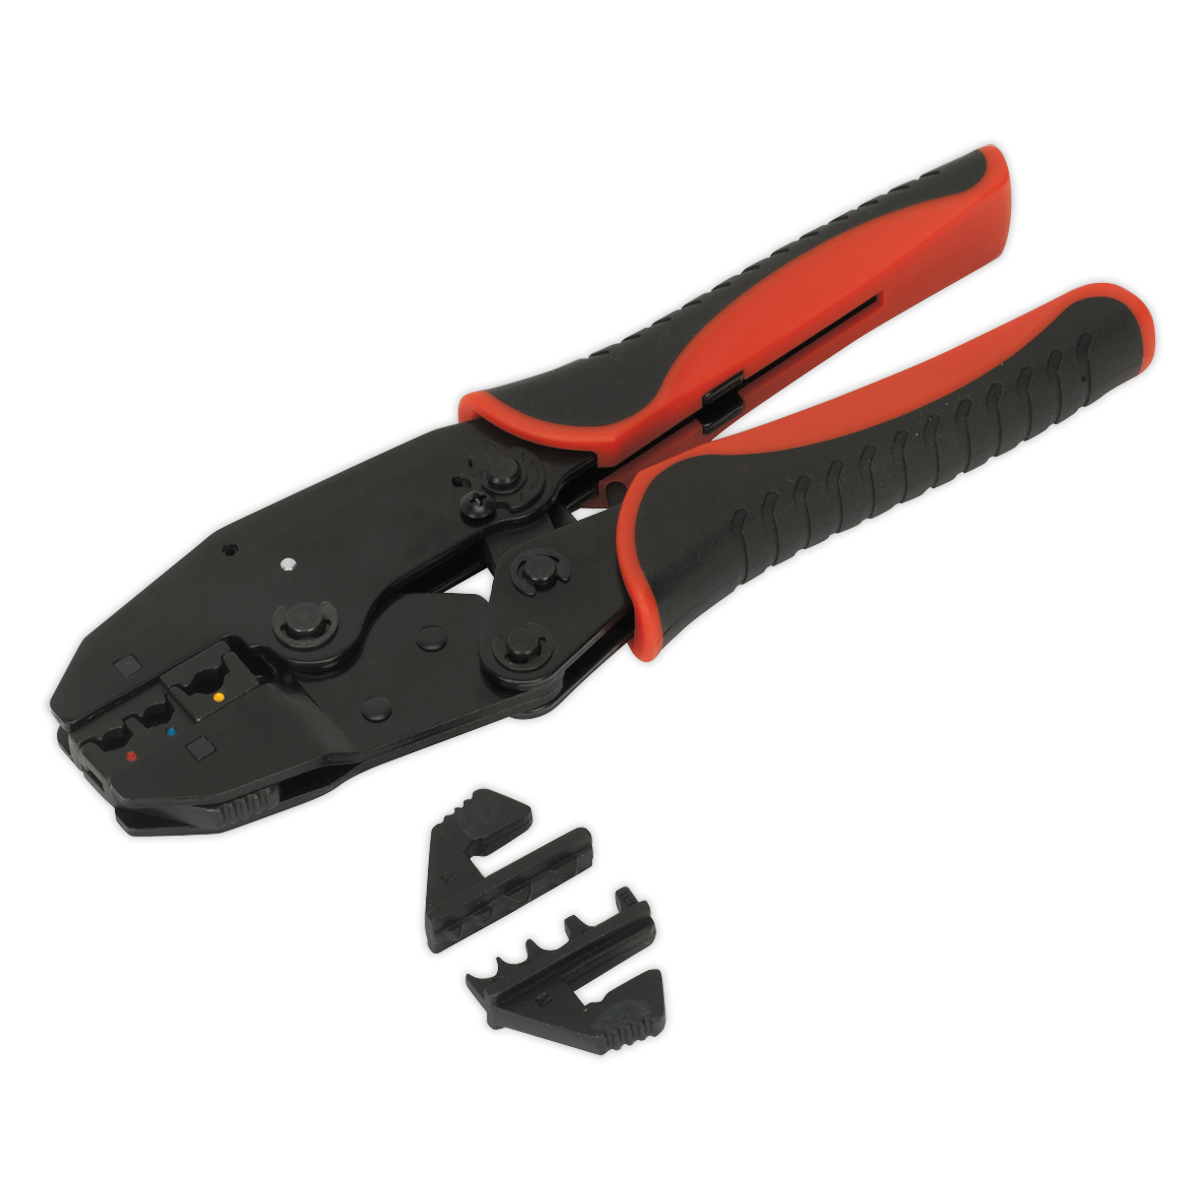 Sealey Ratchet Crimping Tool Interchangeable Jaws